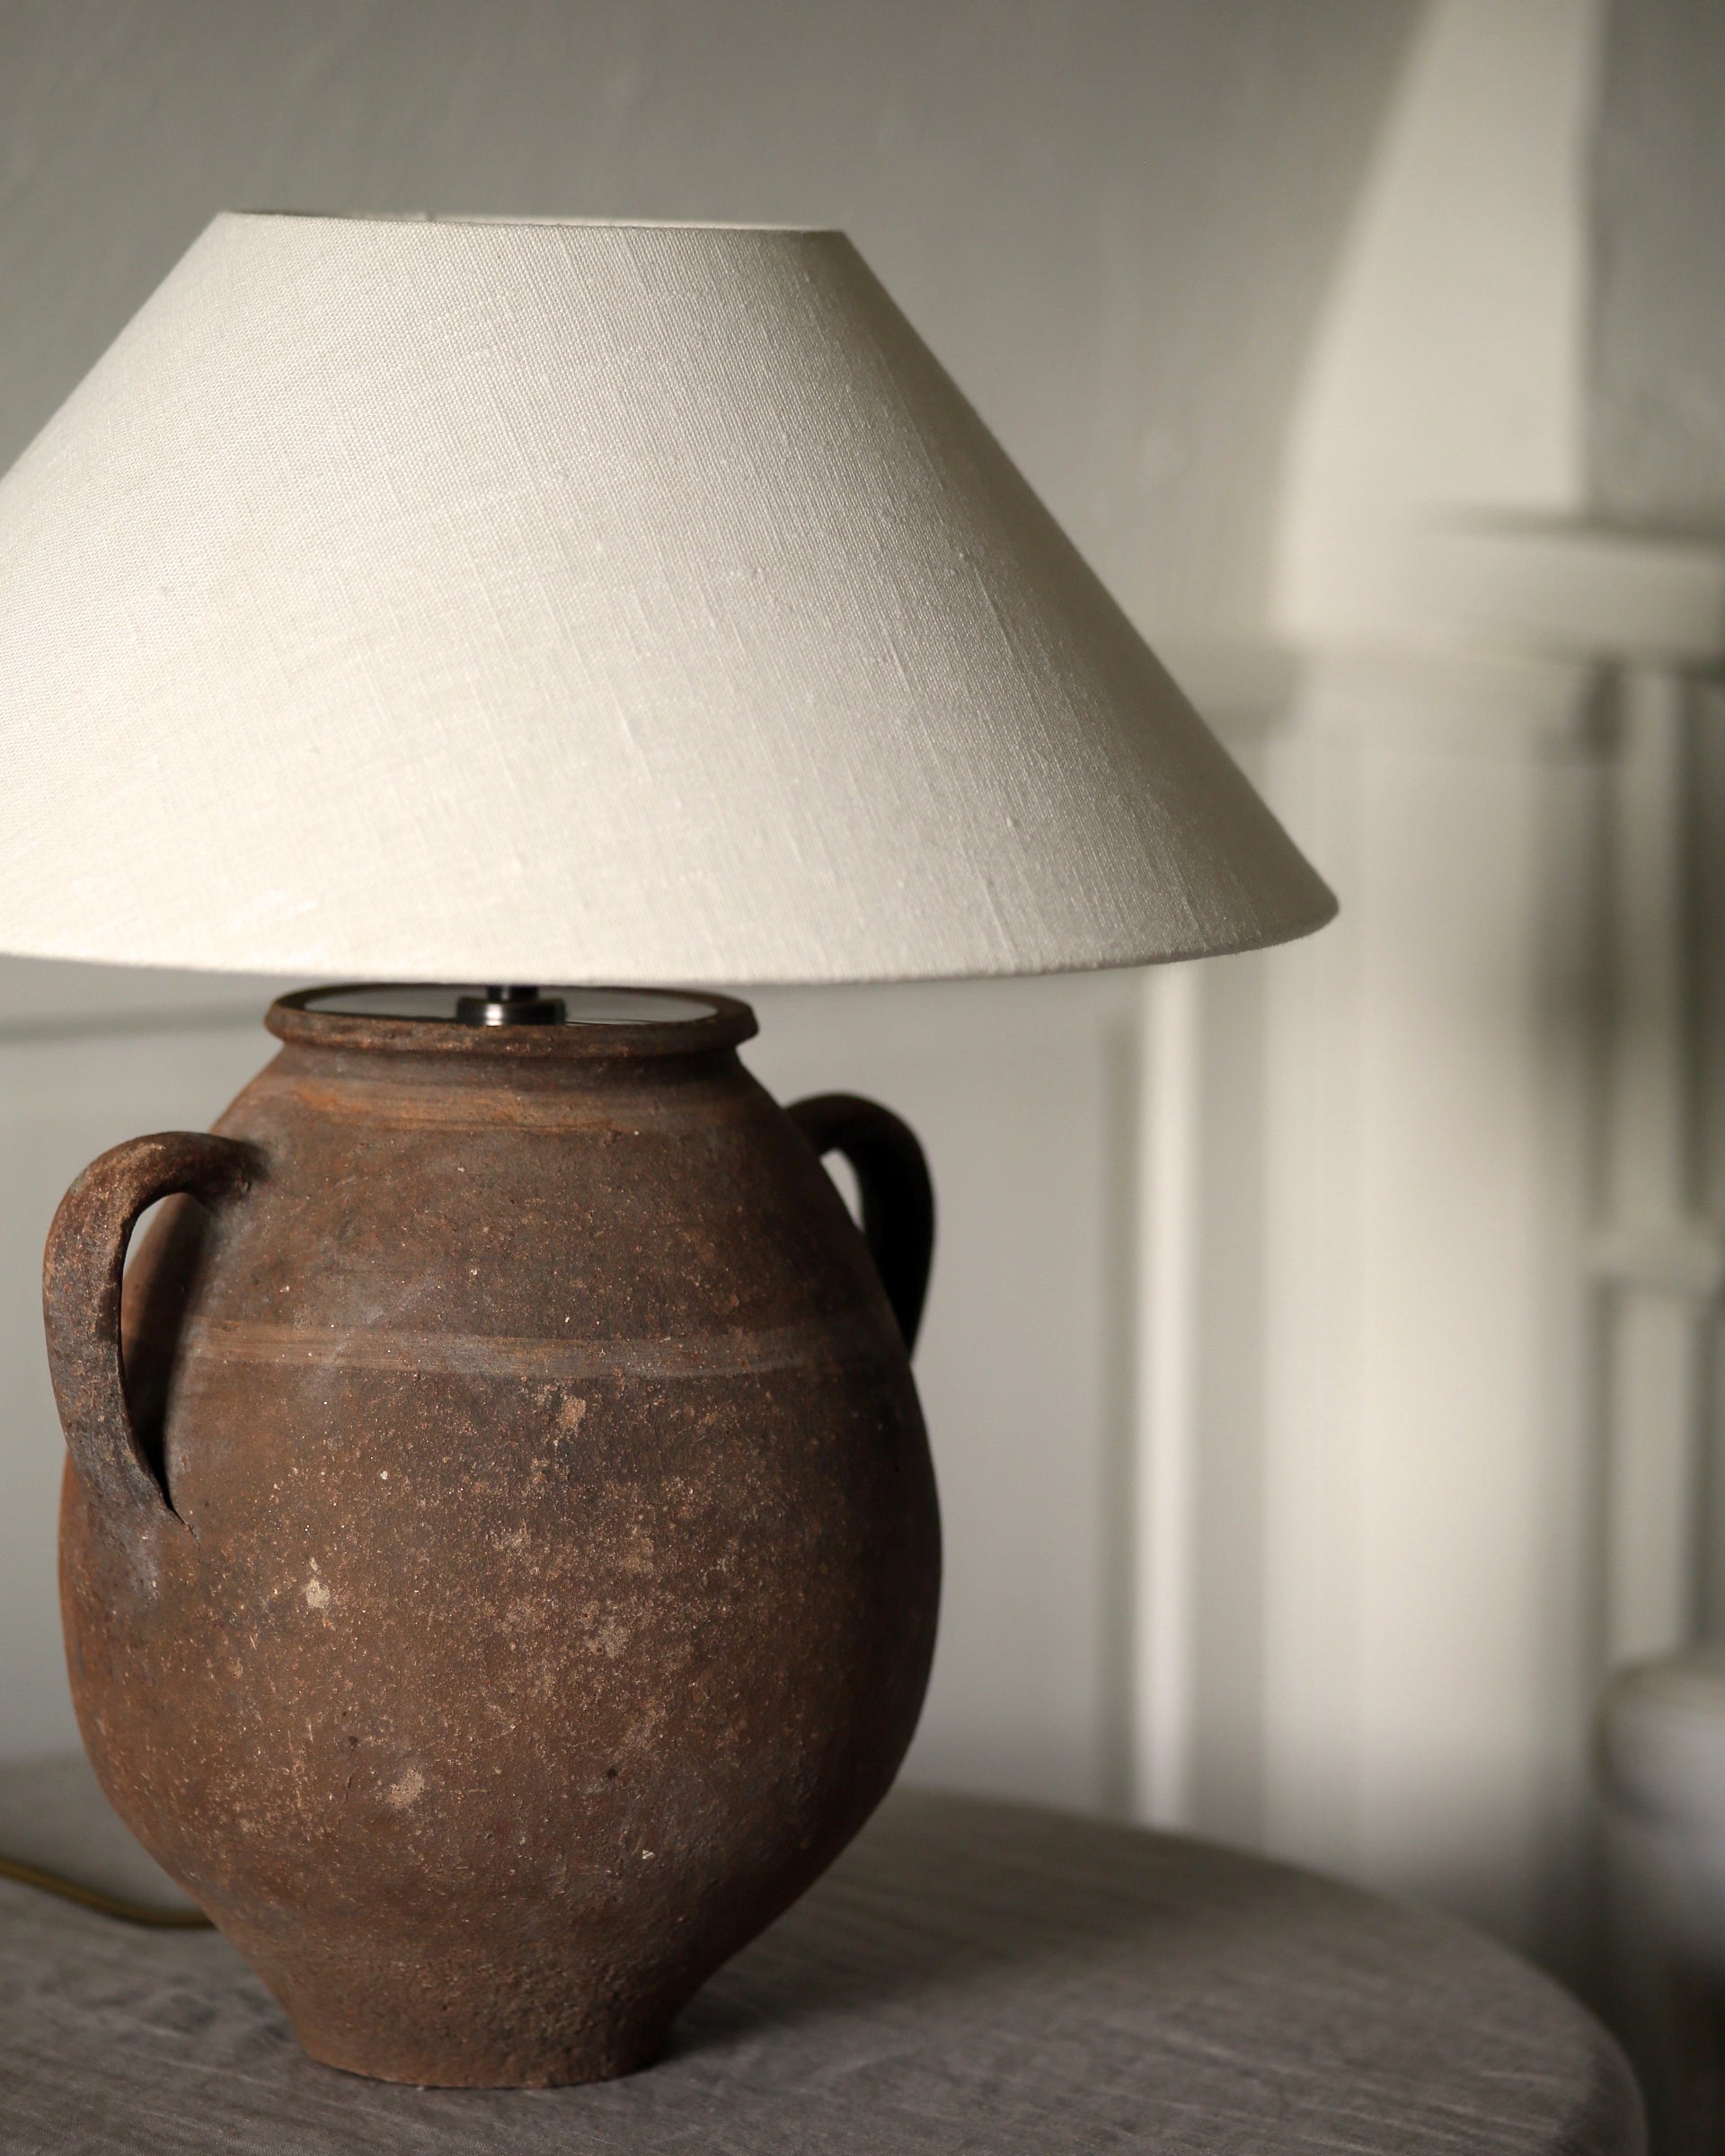 Rustic textured surface of olive pot and linen textured lampshade